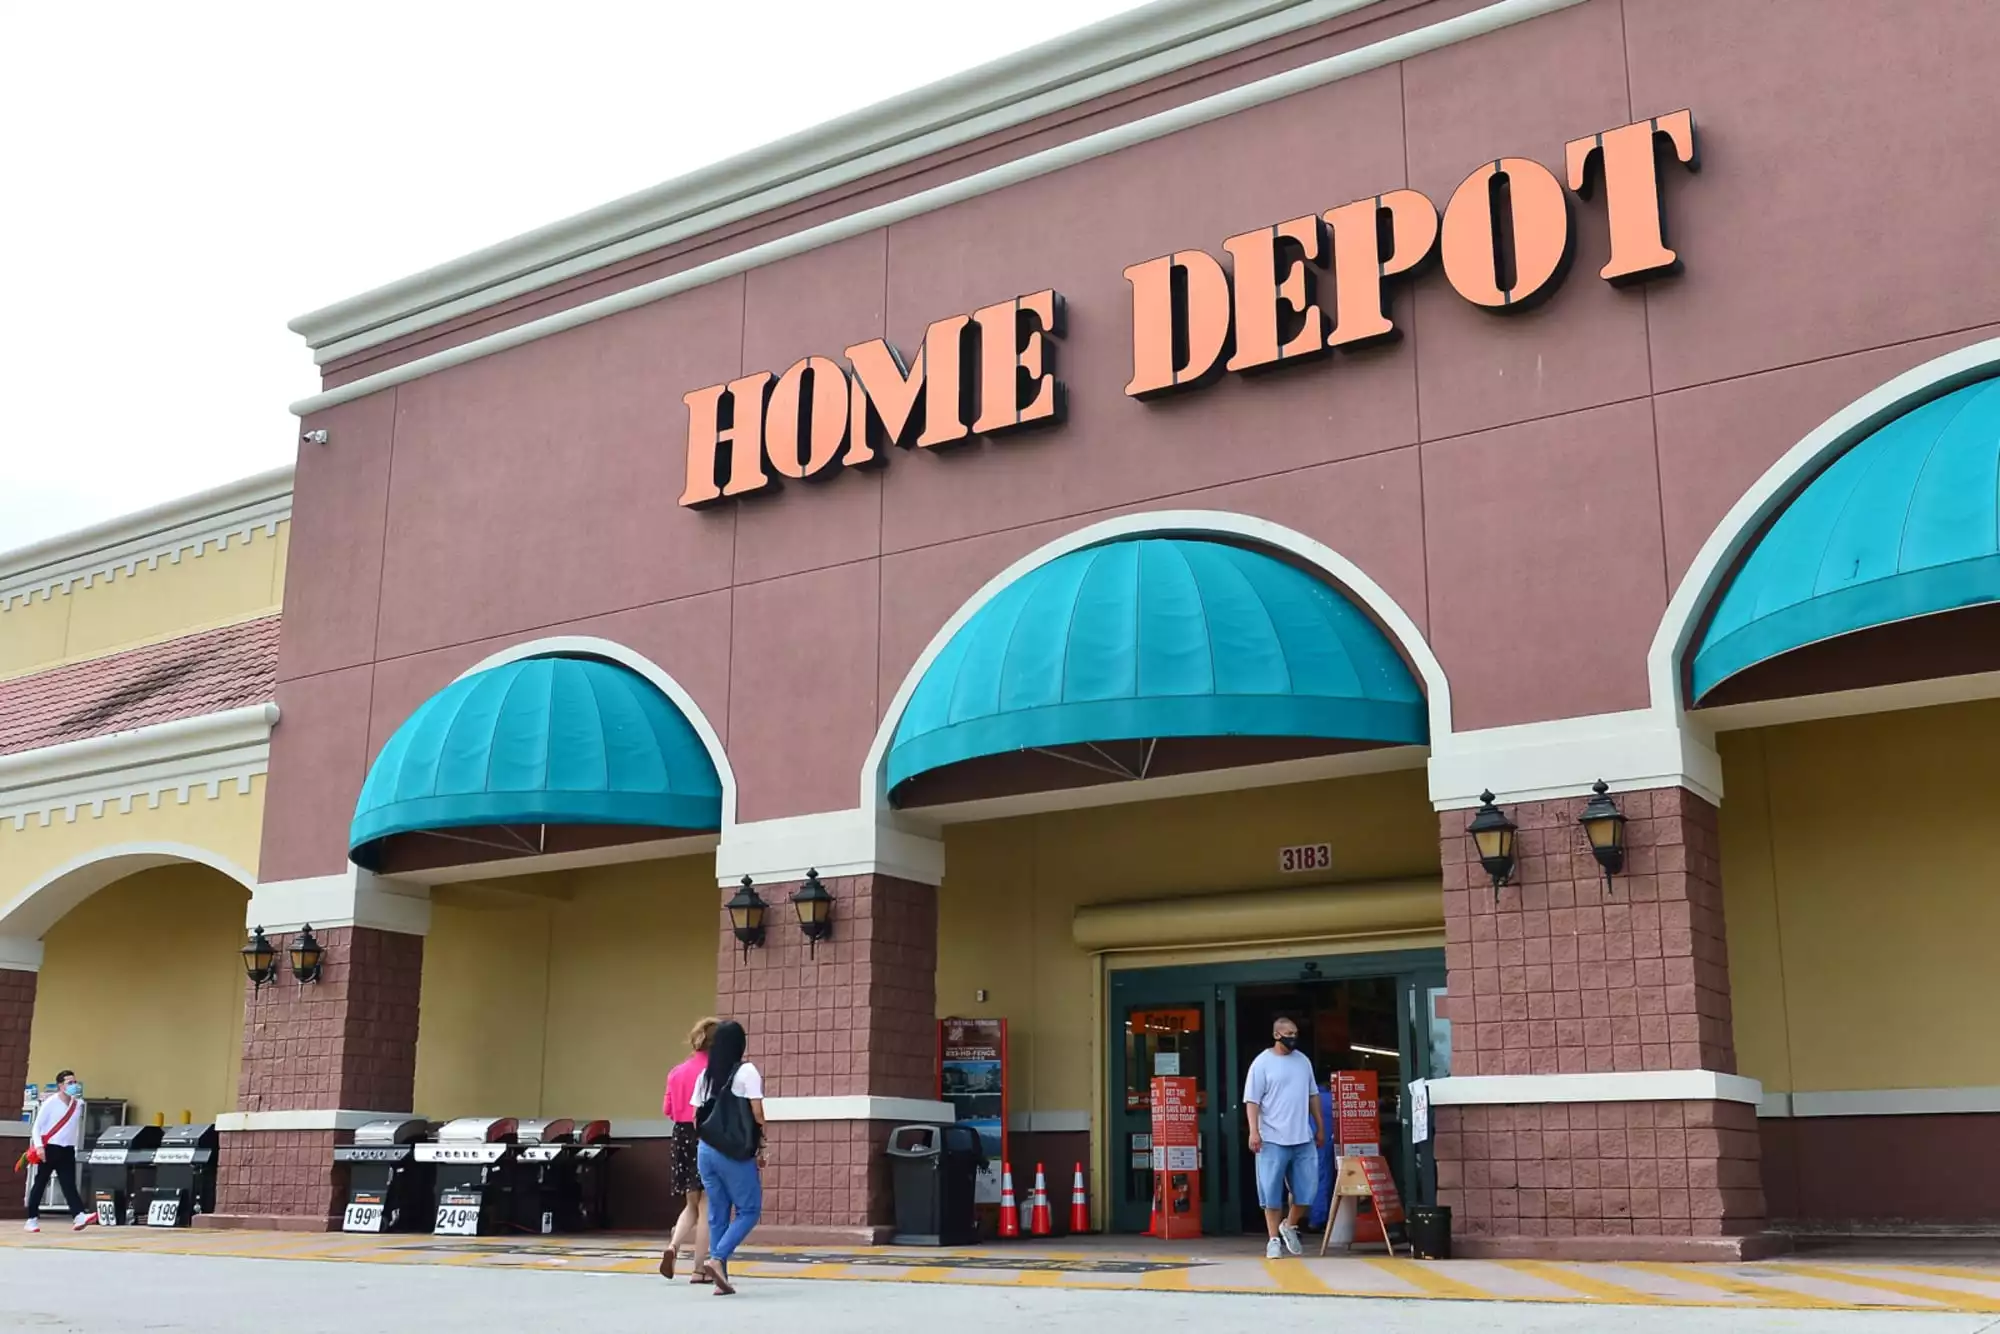 Does Home Depot offer AAA discounts?